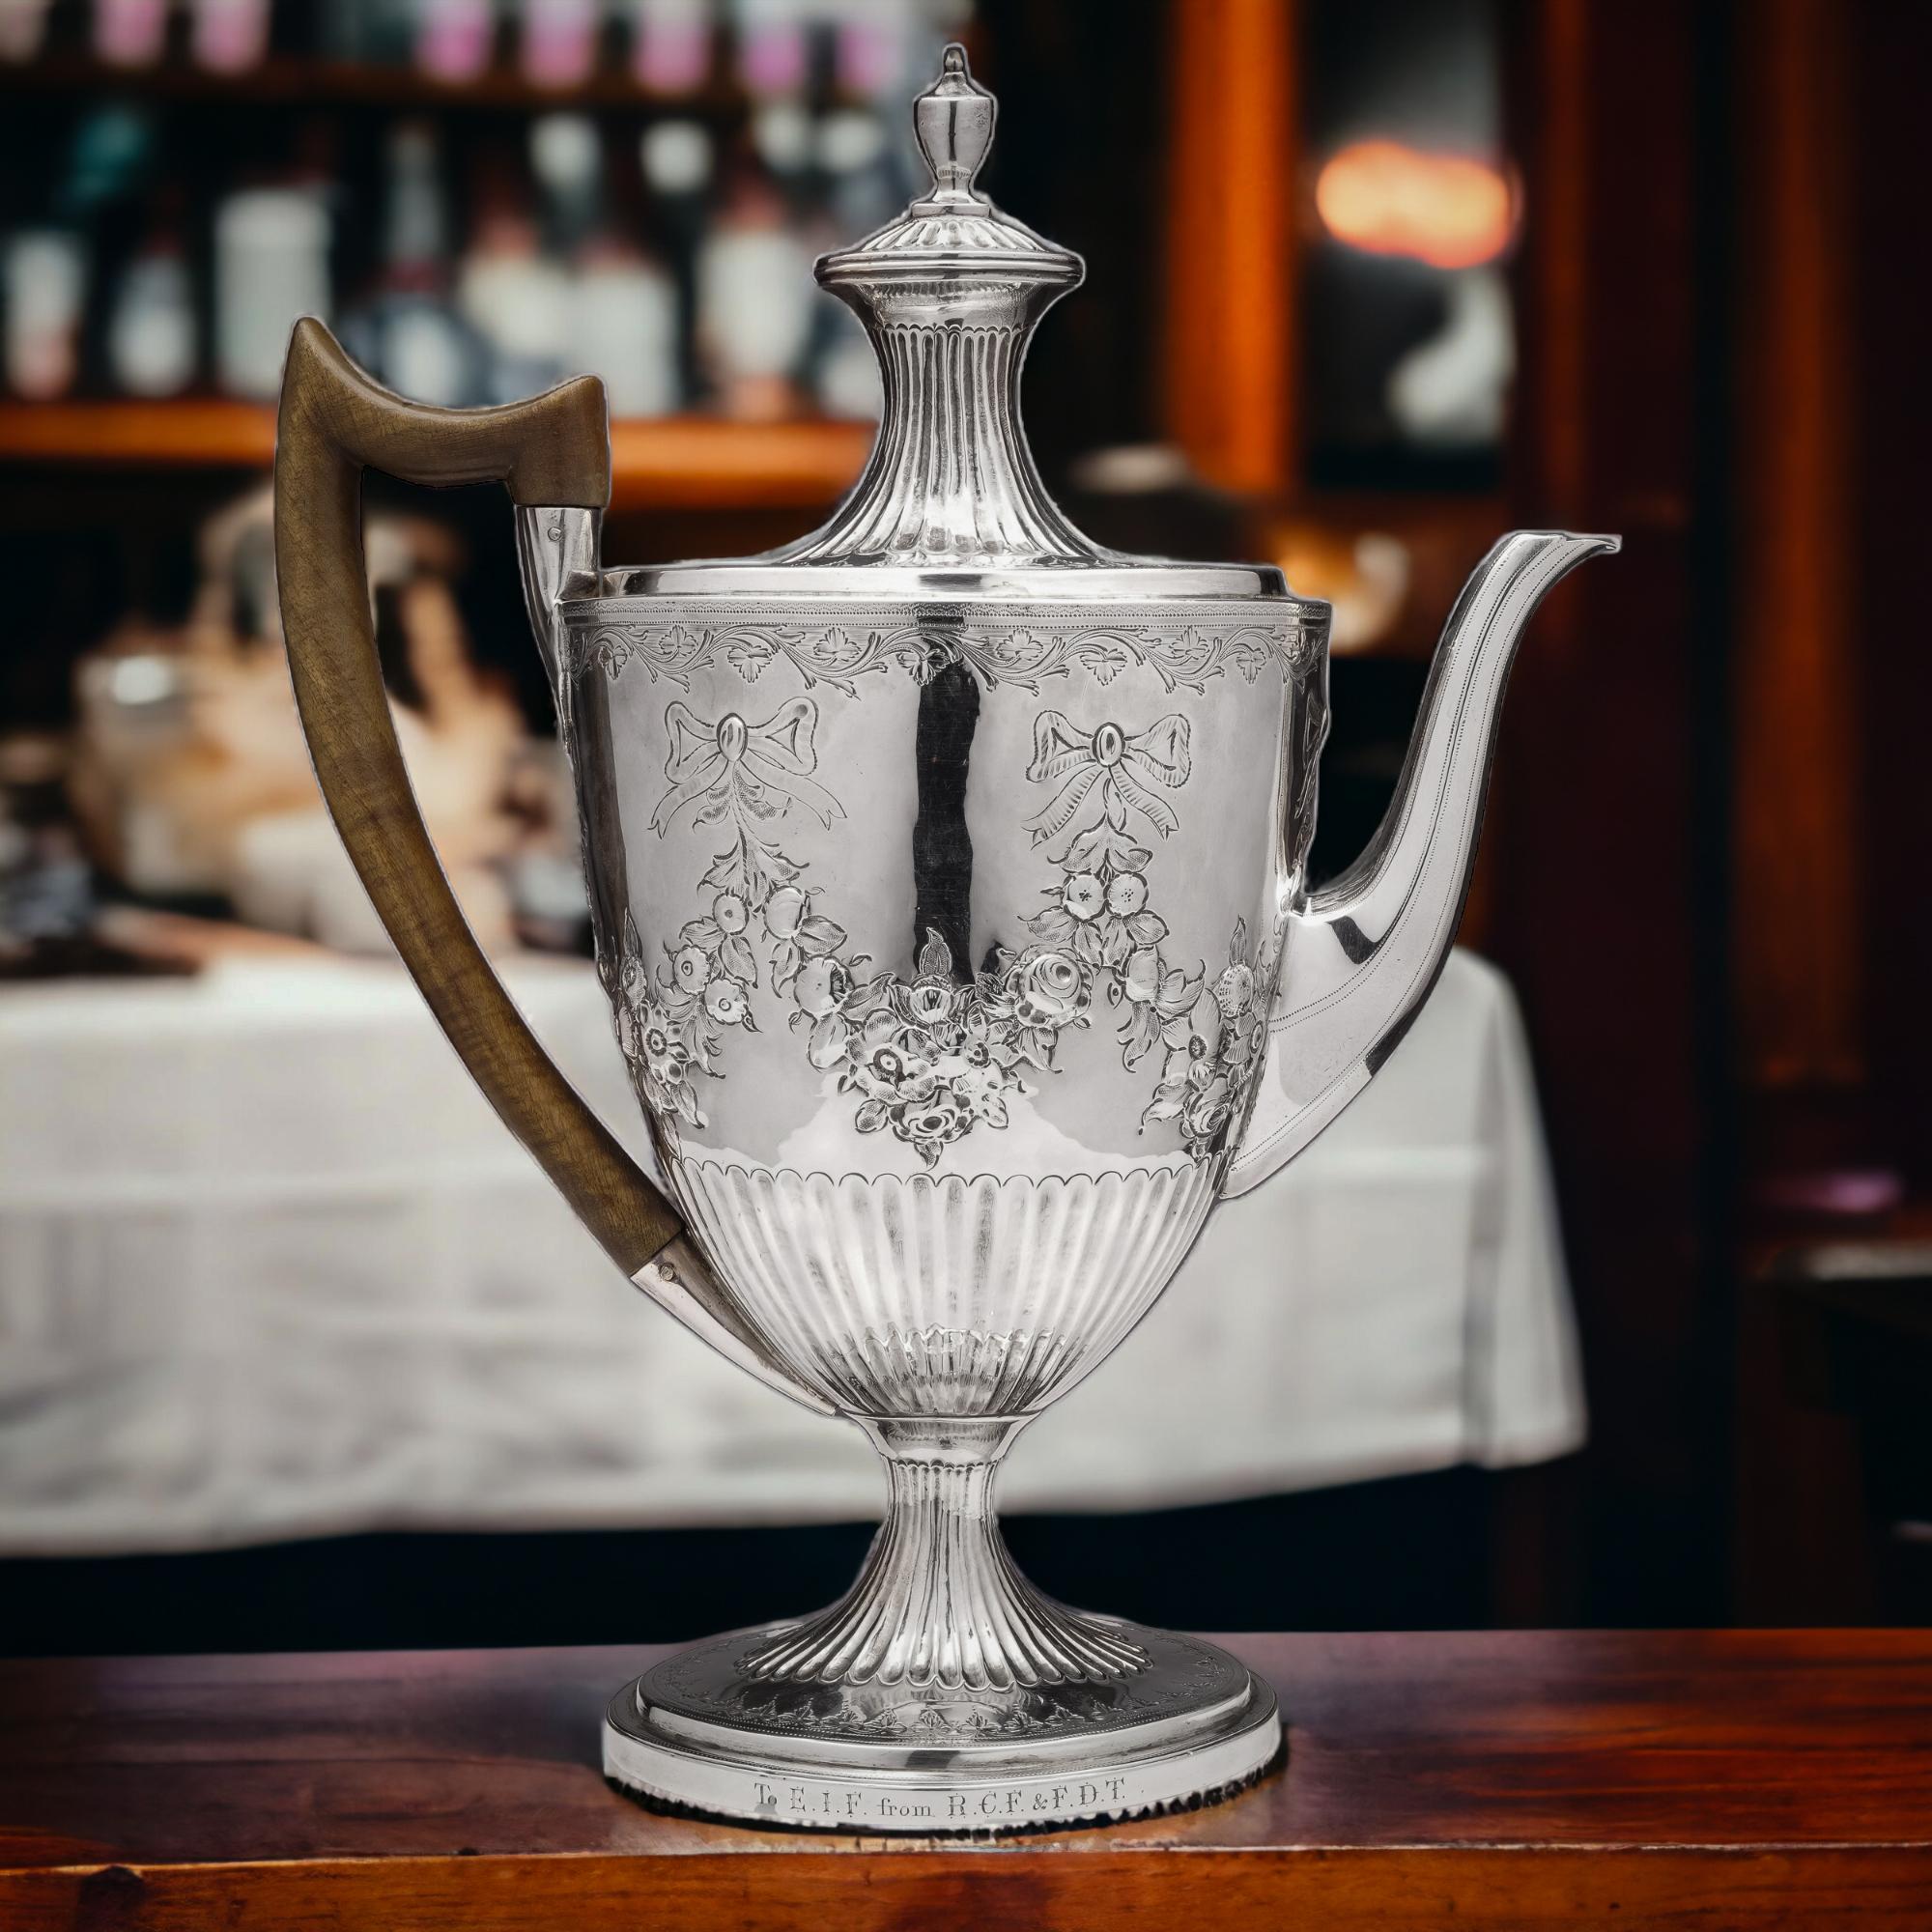 Exquisite Antique Georgian Silver Coffee Pot, London 1832, by John Reily

A truly captivating piece, this coffee pot bears the initials on its round base: 